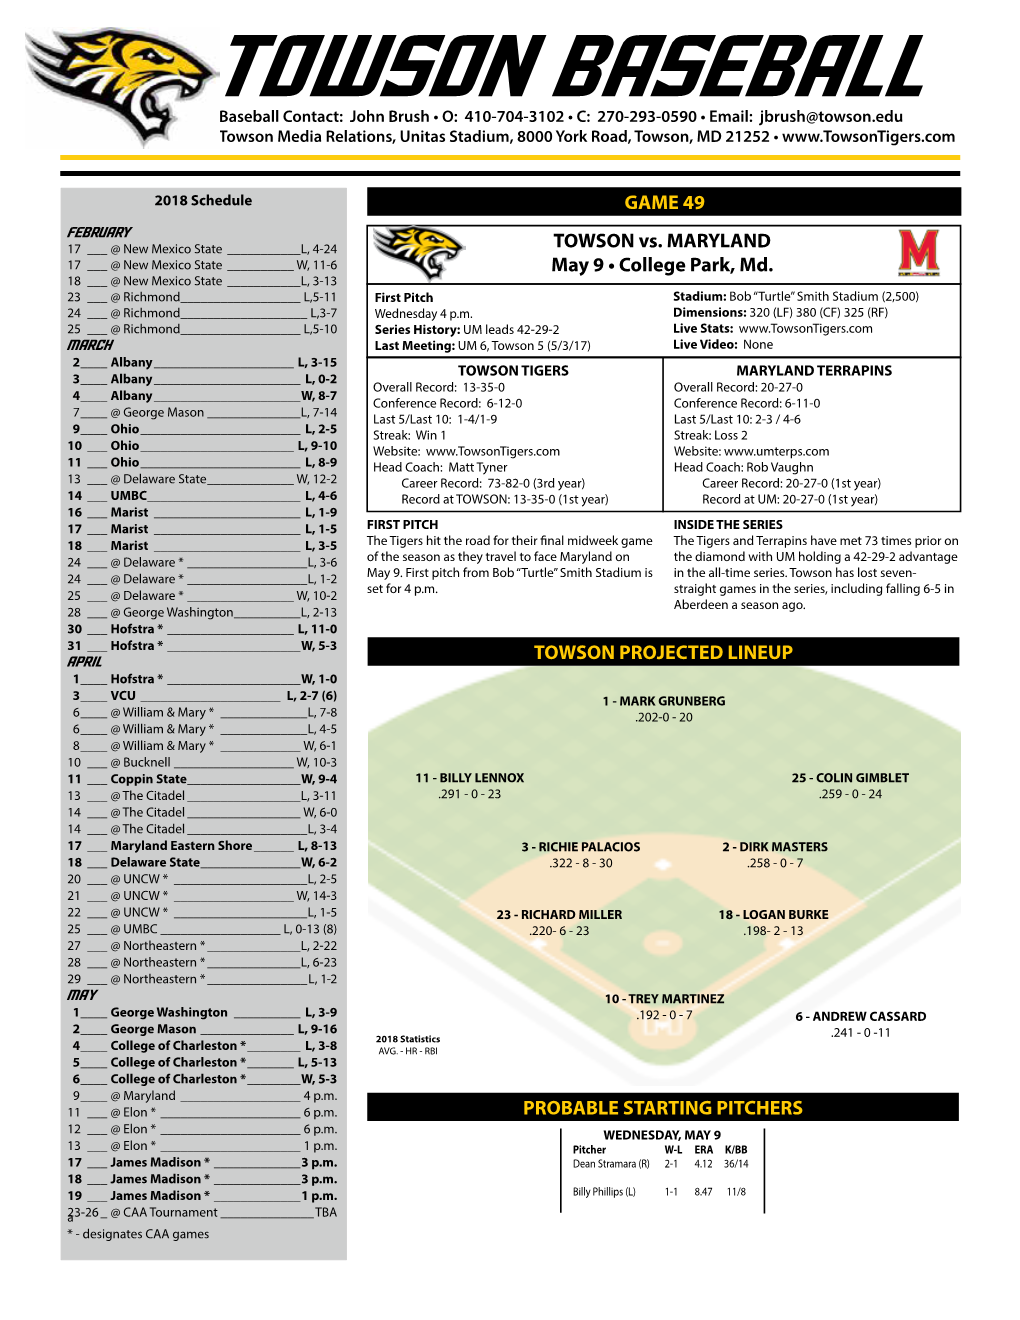 TOWSON BASEBALL GENERAL Midweek Baseball PL AYERS to WATCH Name of School______Towson University the Tigers Play Their Final Midweek Game of City/Zip______Towson, Md